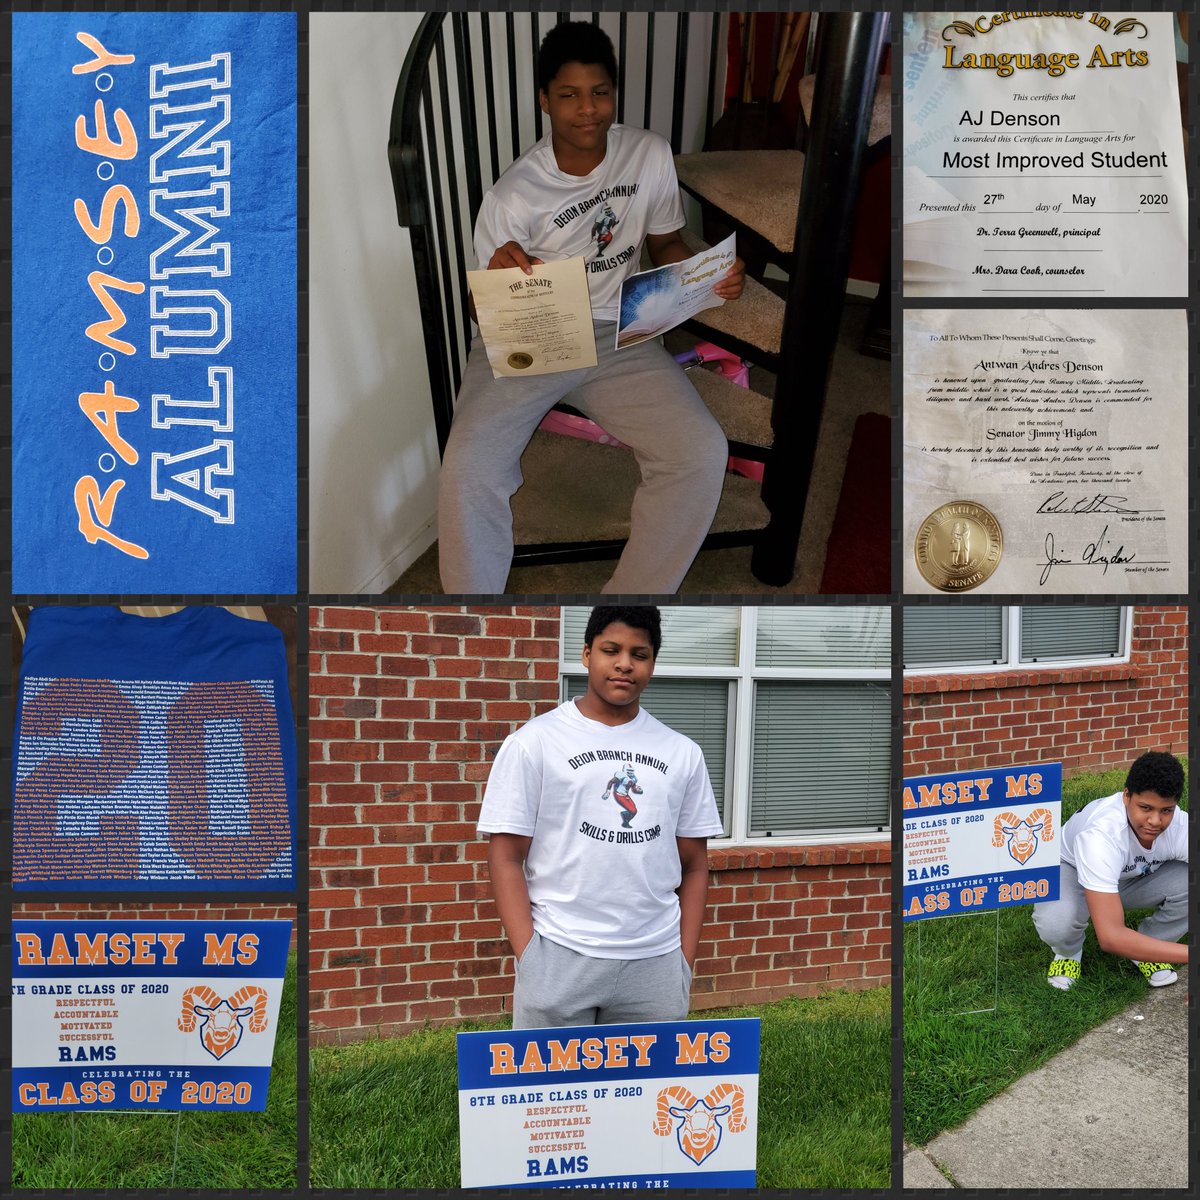 And just like that, he's officially a freshman!! So proud of him and the growth he made over this year! Love you AJ!! Up next Fern Creek! #RamseyRams  #ProudMom #FutureTiger 
@RamseyMS_JCPS @8thRamsey